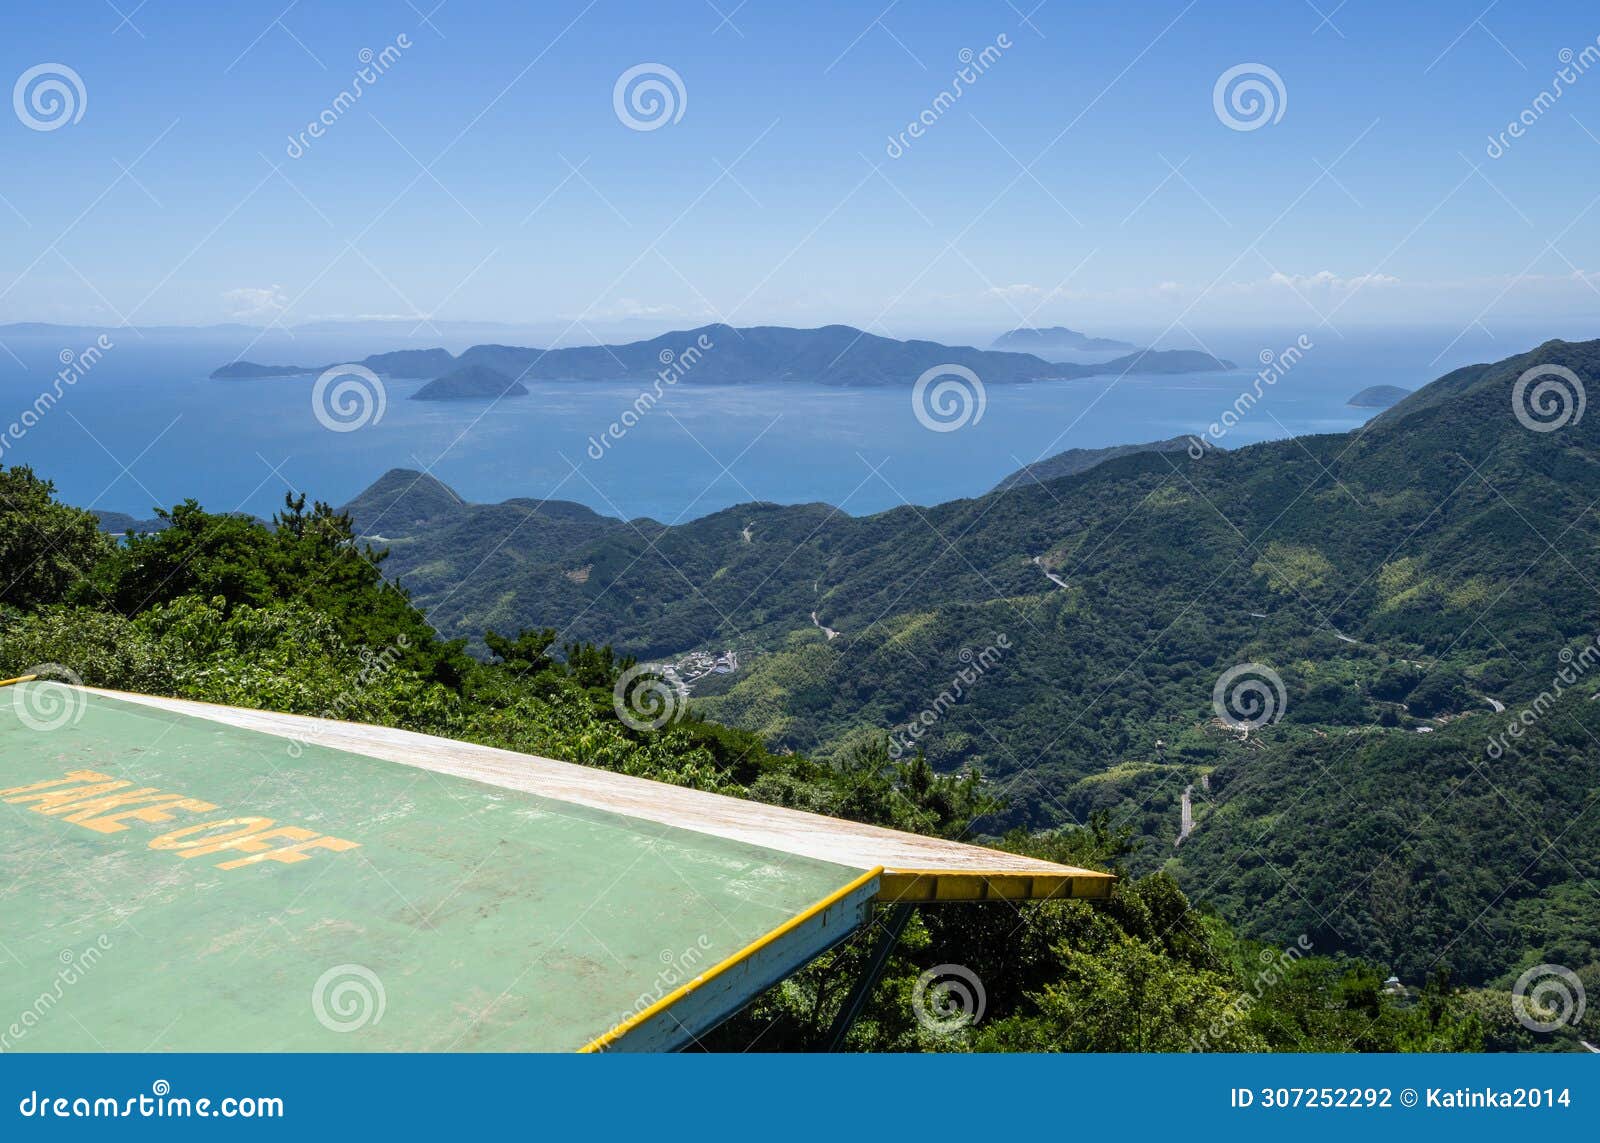 take off platform on mt dake observation point on suo oshima island with view of seto inland sea